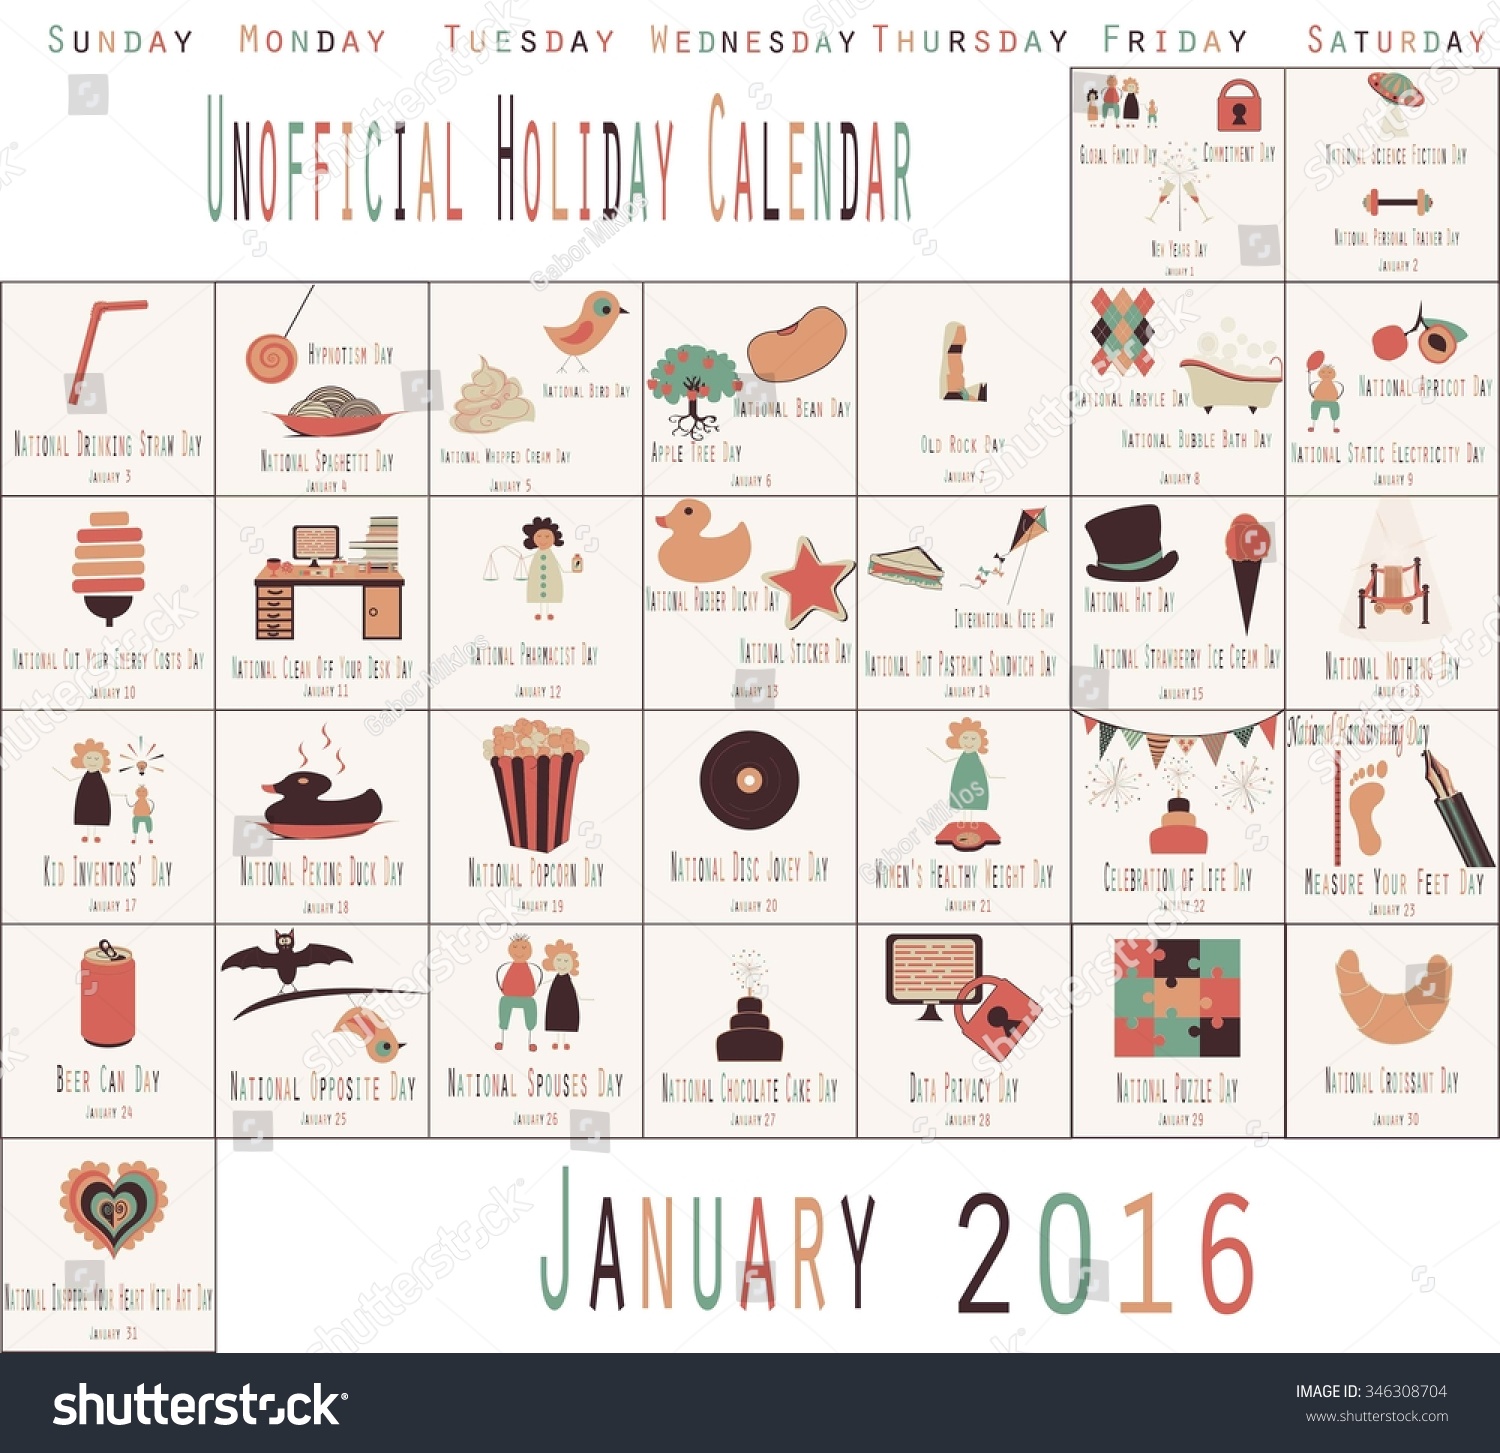 Funny Unofficial Holidays Calendar For January 2016 Stock Vector